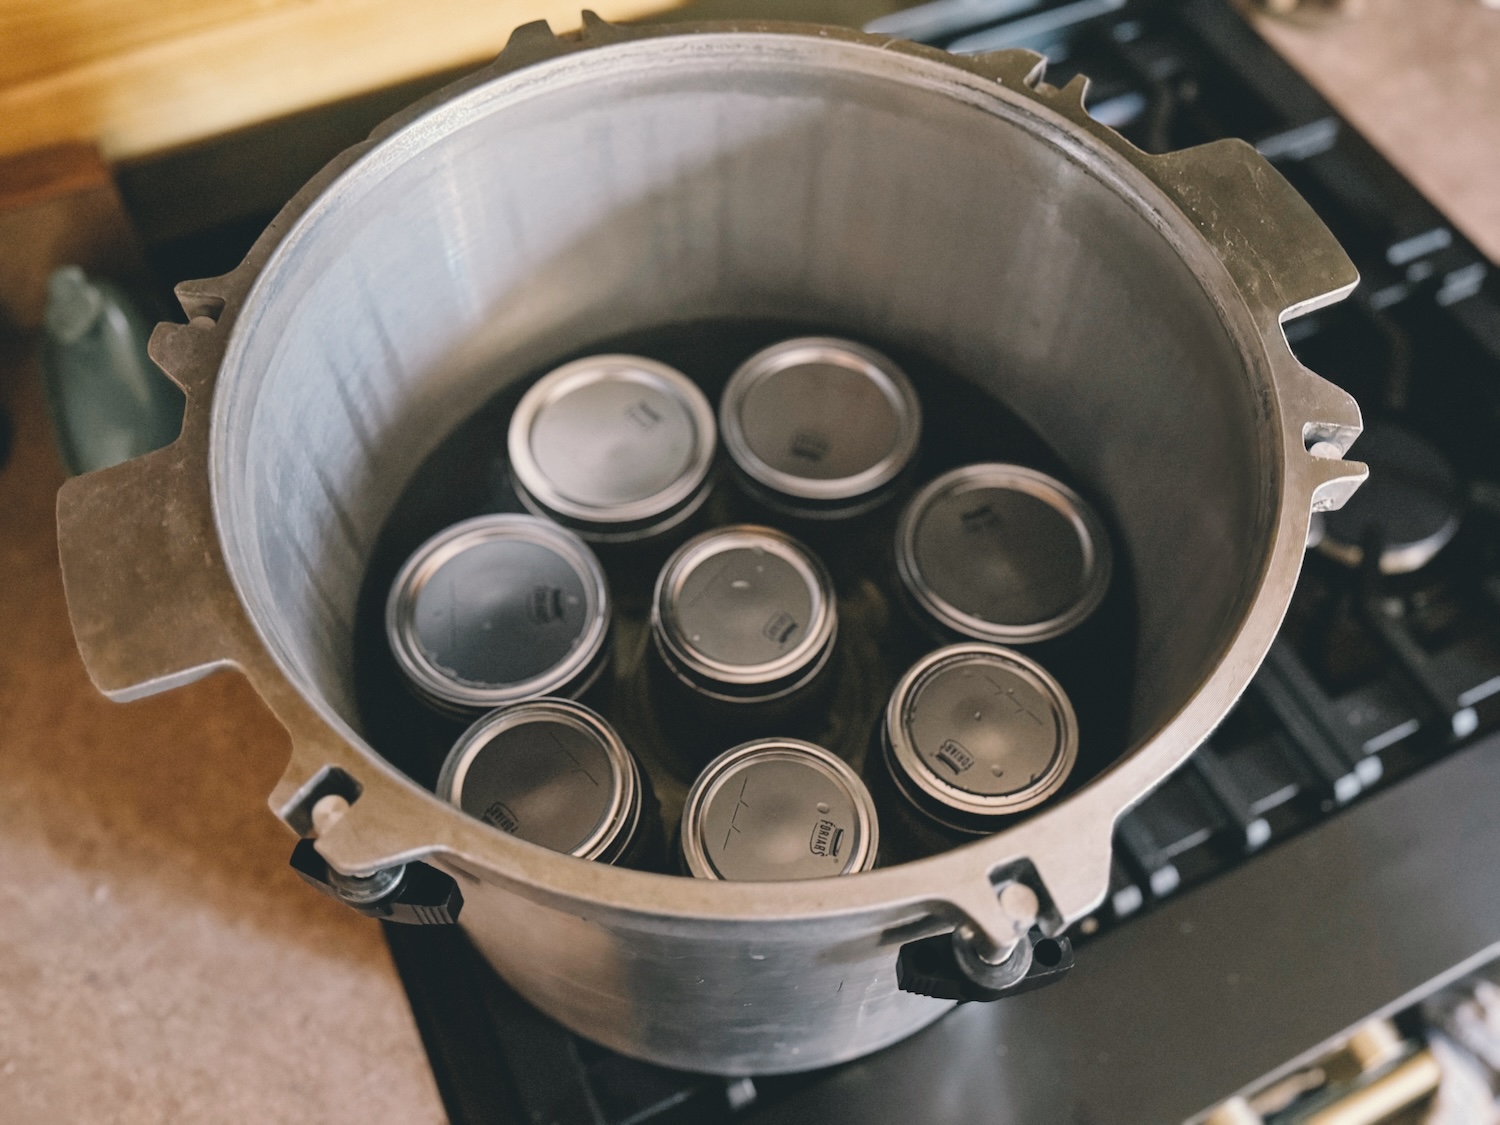 A photo showing a pressure canner loaded up with 8 jars on the bottom